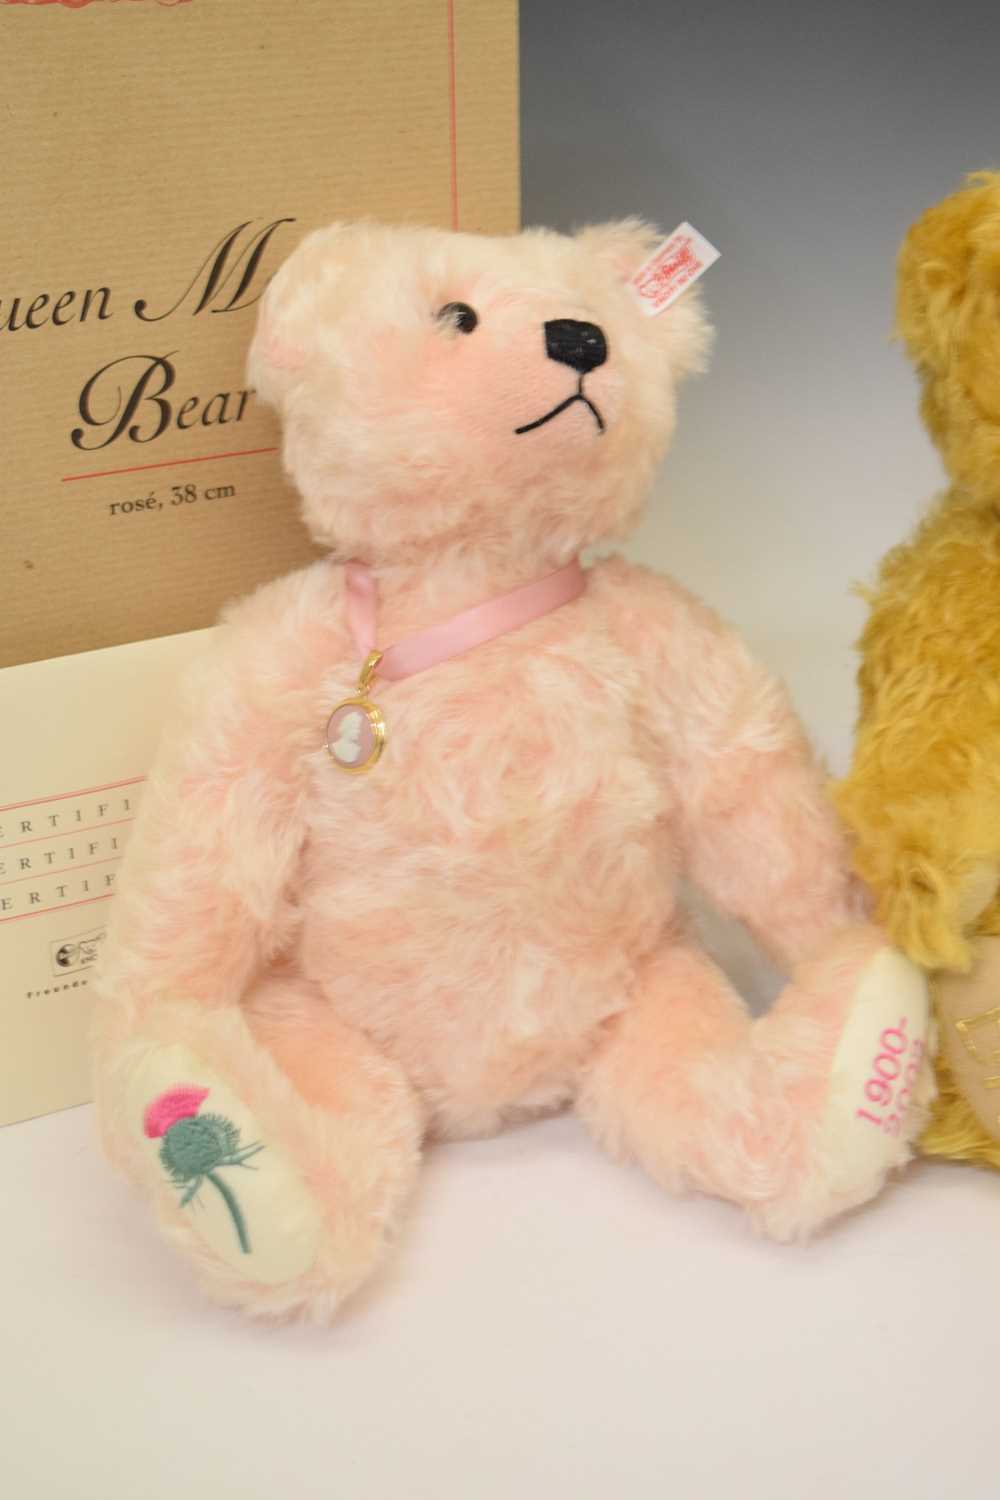 Steiff - Two limited edition teddy bears - 'Golden Jubilee' and 'The Queen Mother' - Image 3 of 8